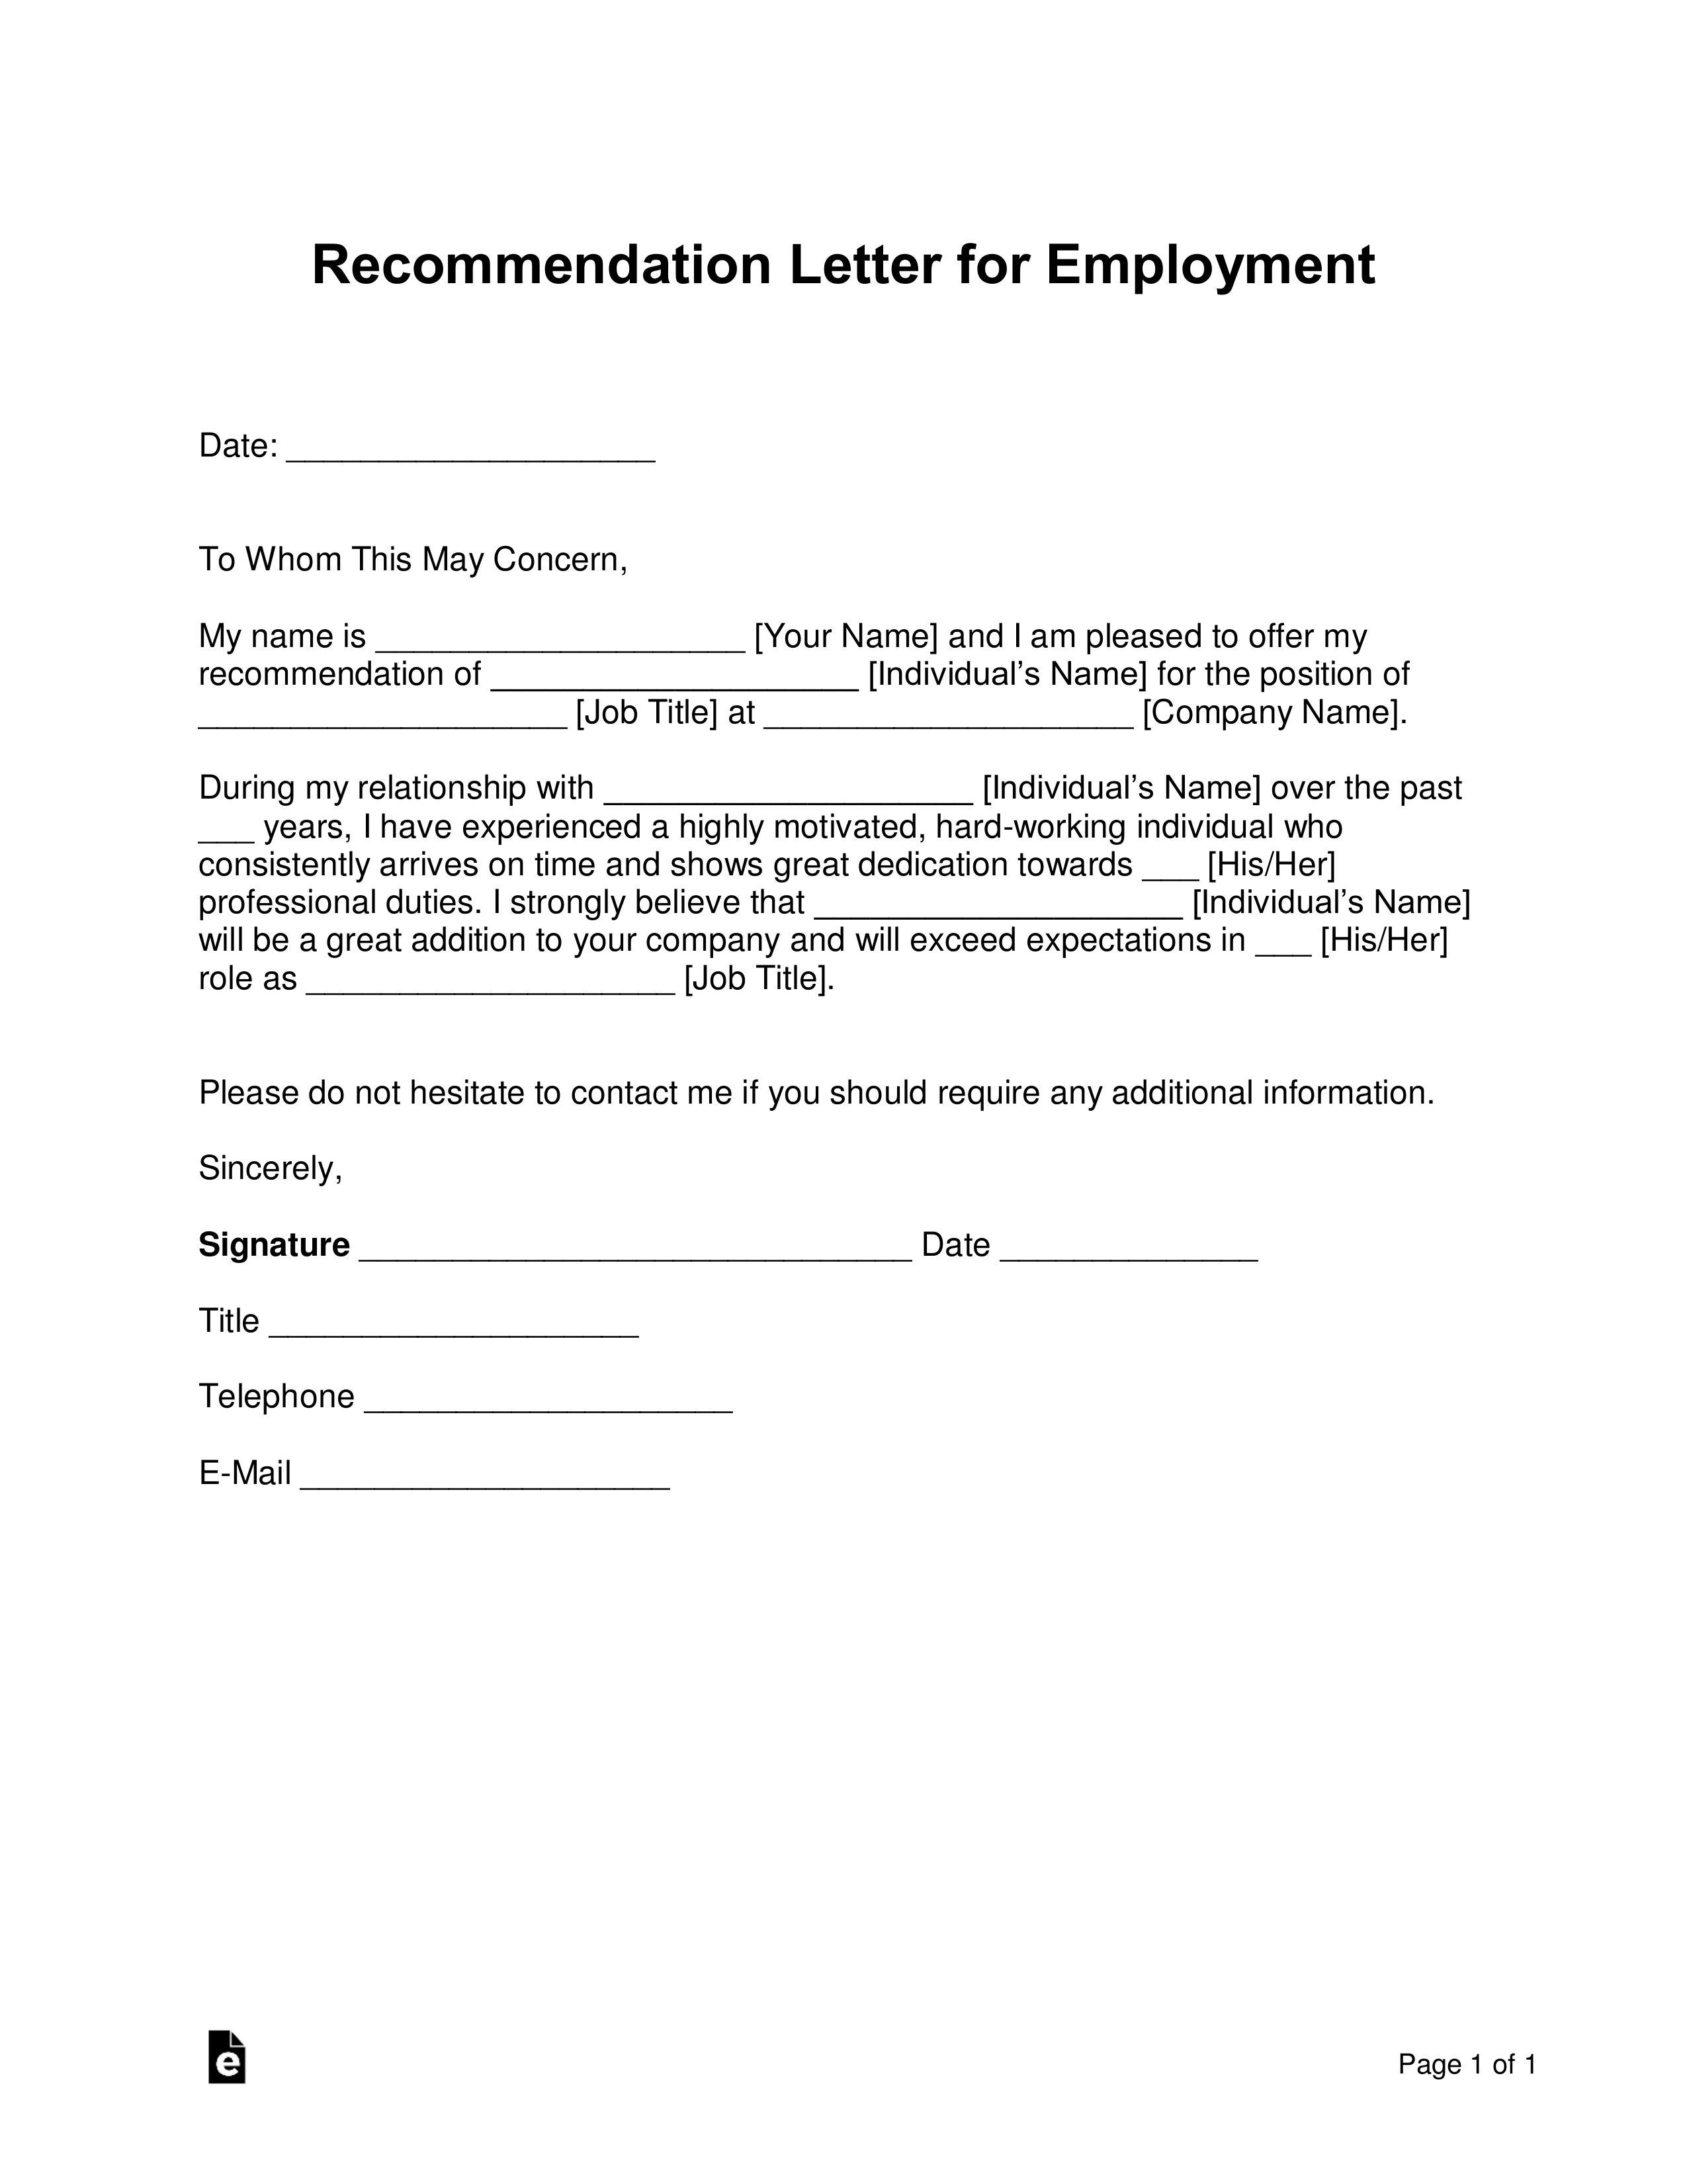 An Example Of A Recommendation Letter from eforms.com